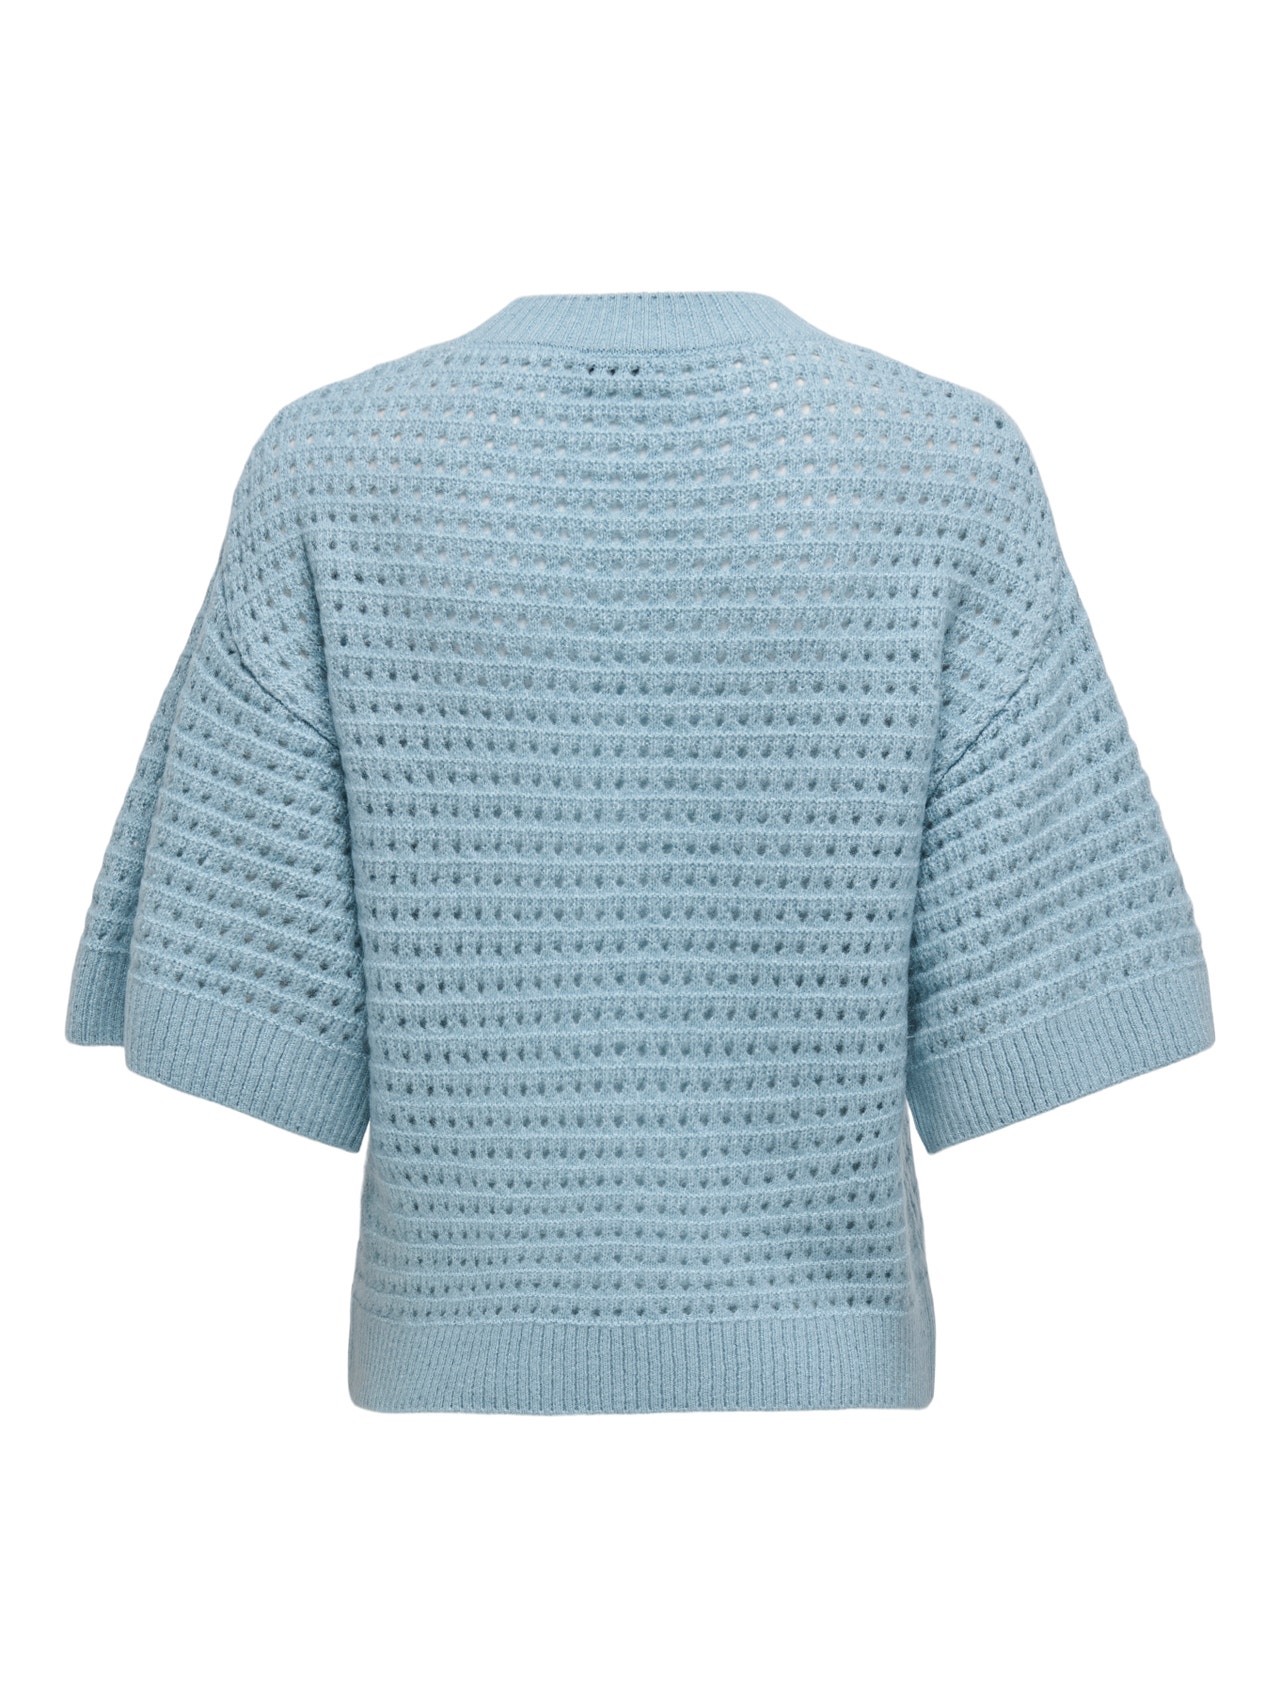 ONLY O-neck knitted top -Powder Blue - 15342482